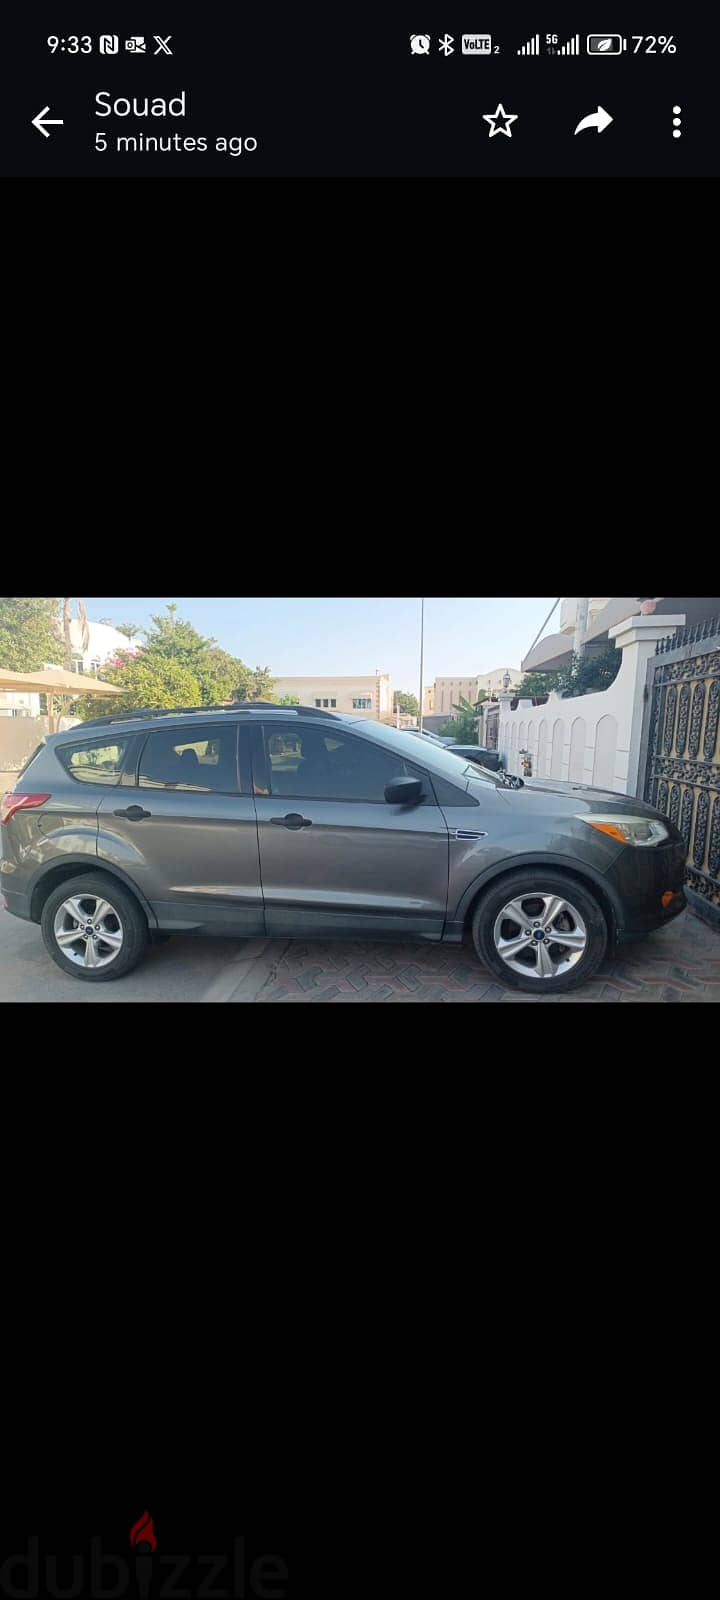 Ford Escape Expat Driven Very Good Condition 3